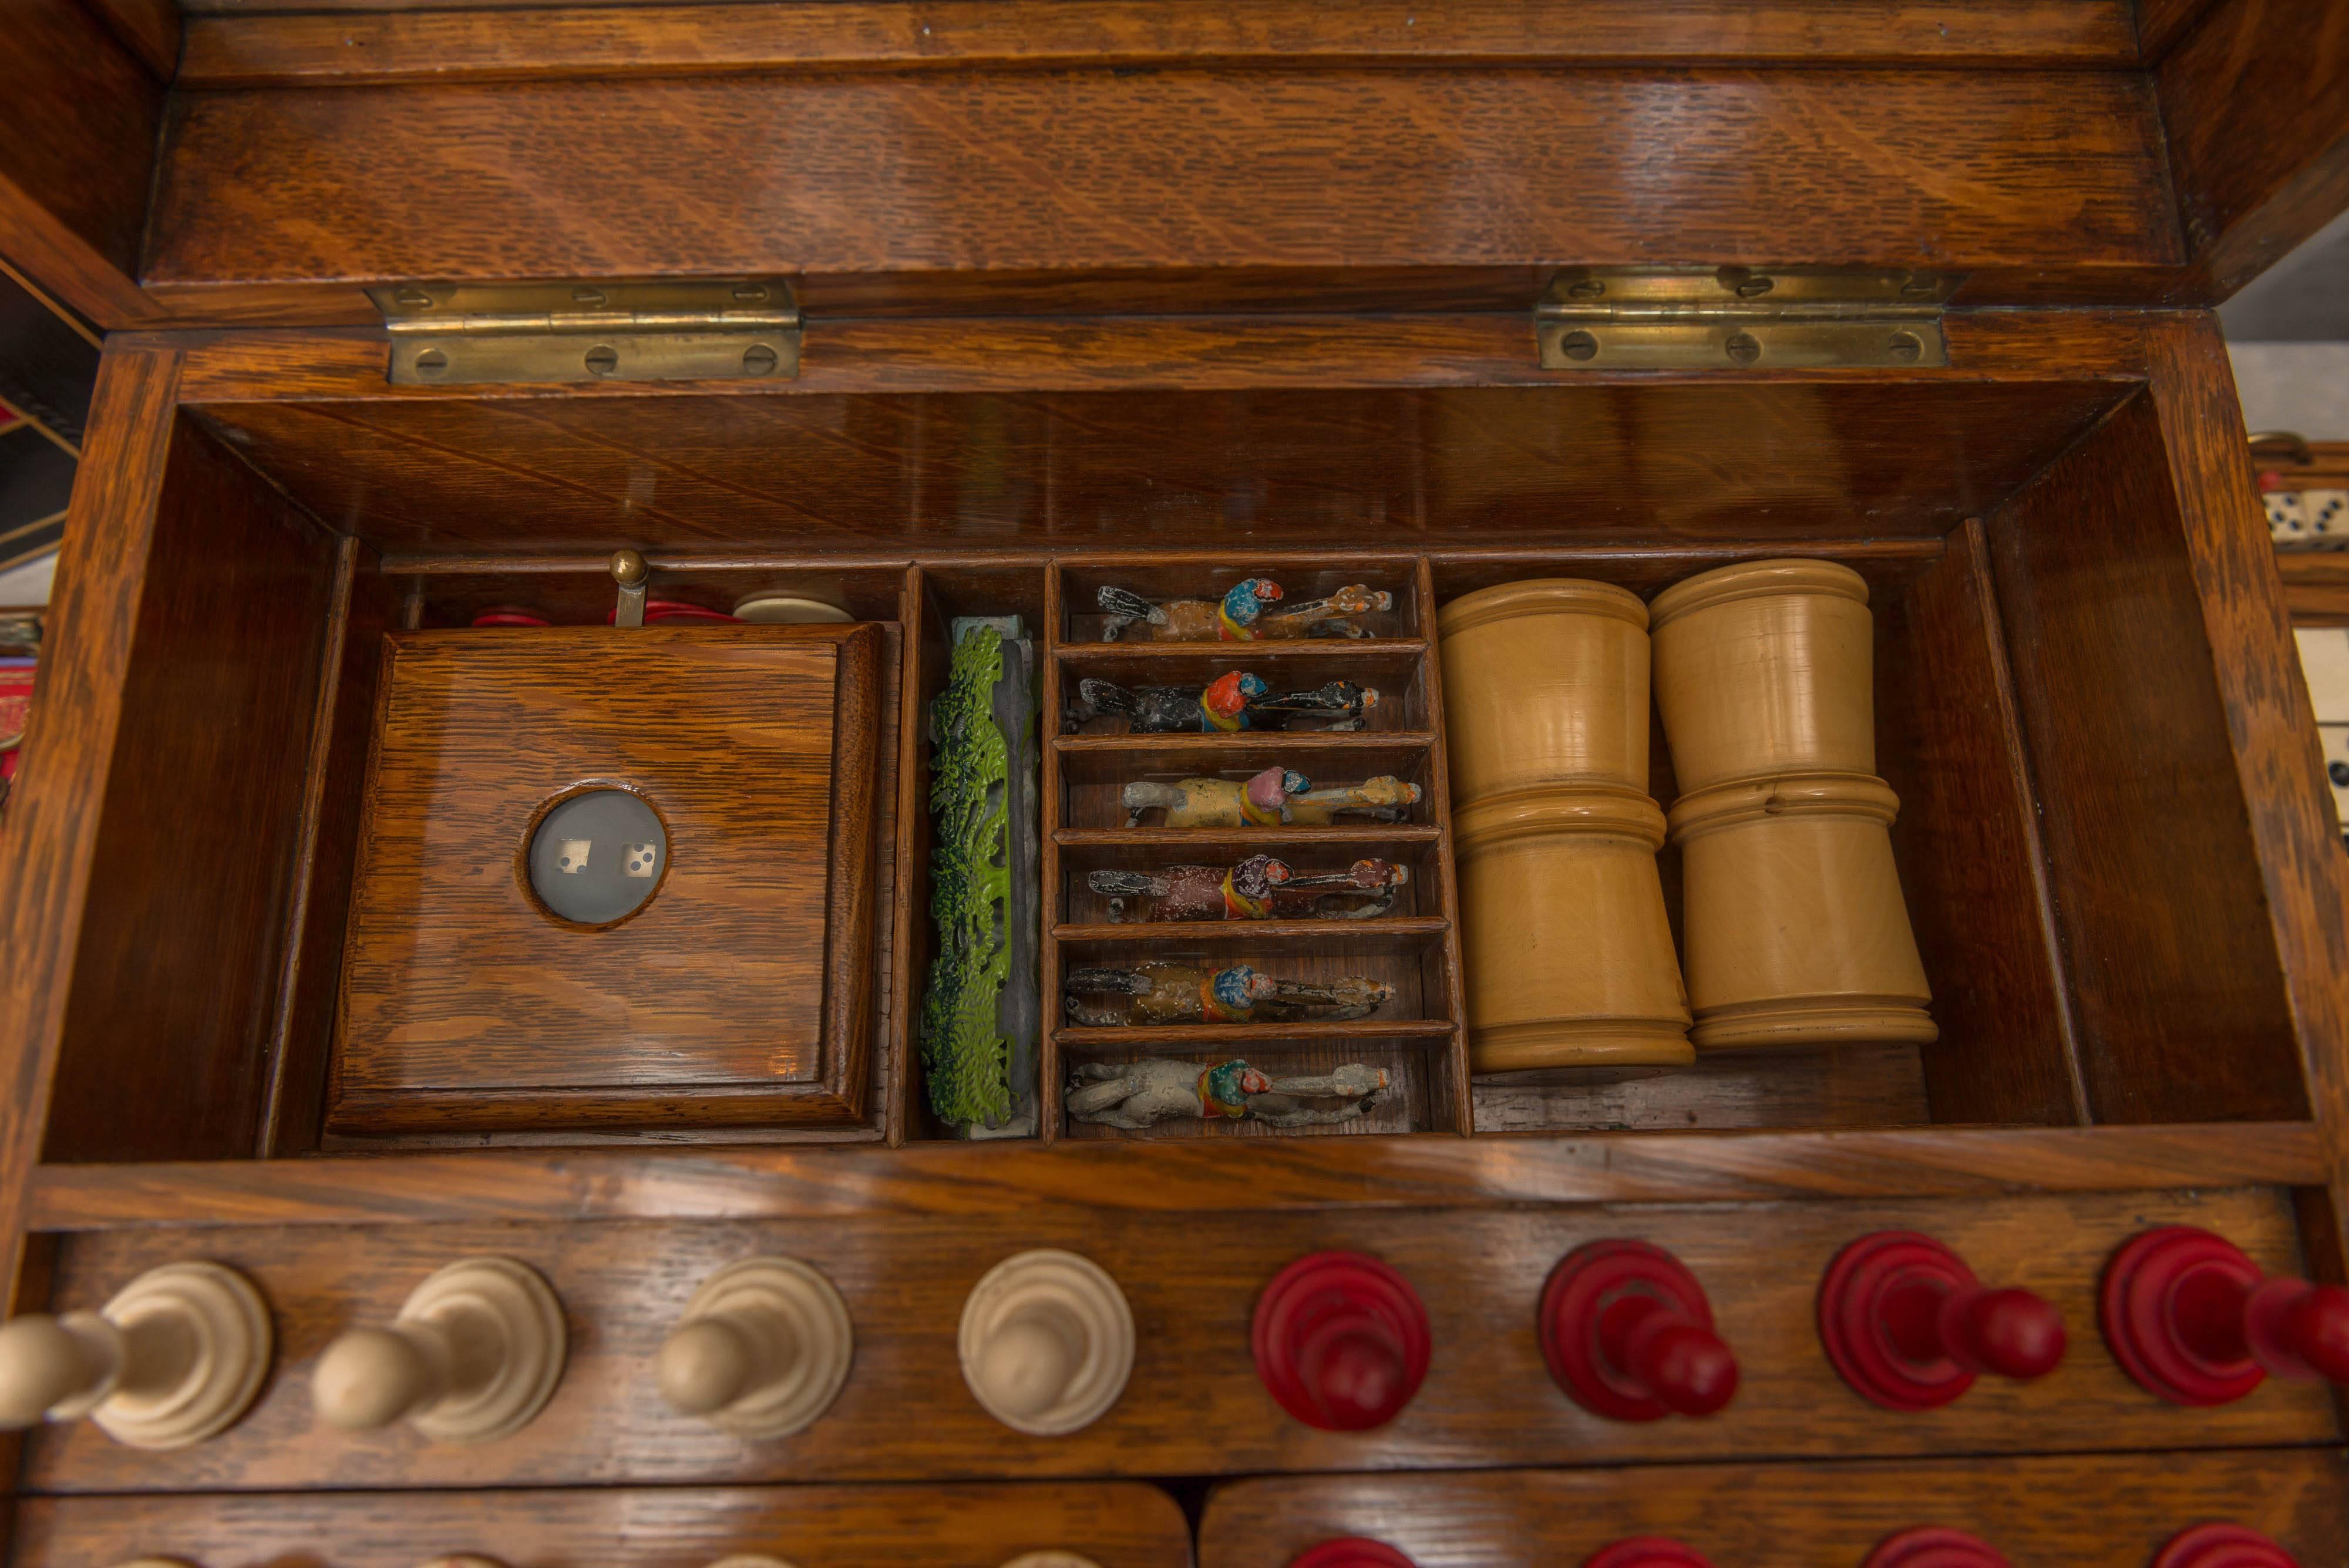 Early 20th Century Oak Box With Multiple Games, Chess, Checkers, Backgammon and Many Others